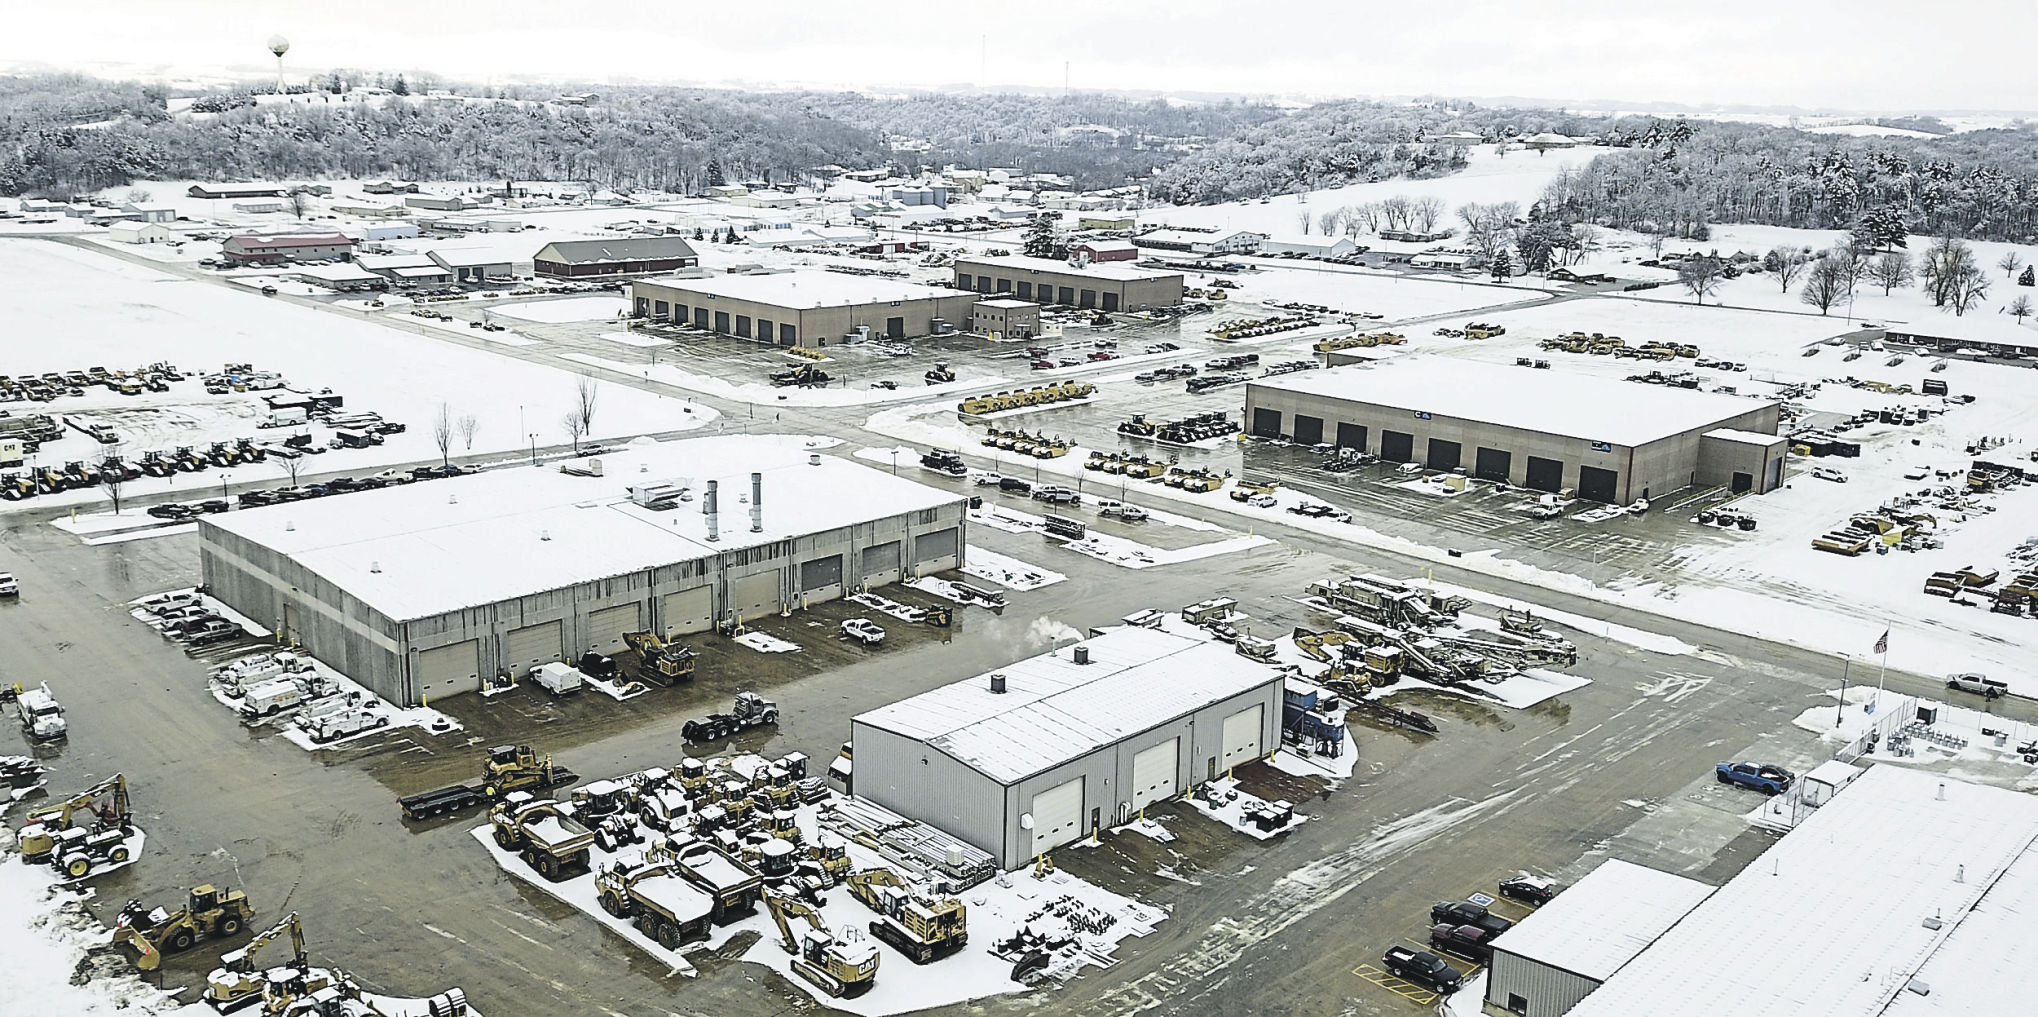 The Elkader, Iowa, industrial park is located on a flat parcel of land among the hills in Clayton County. It began in 1990 to help the town’s economic development. PHOTO CREDIT: Dave Kettering